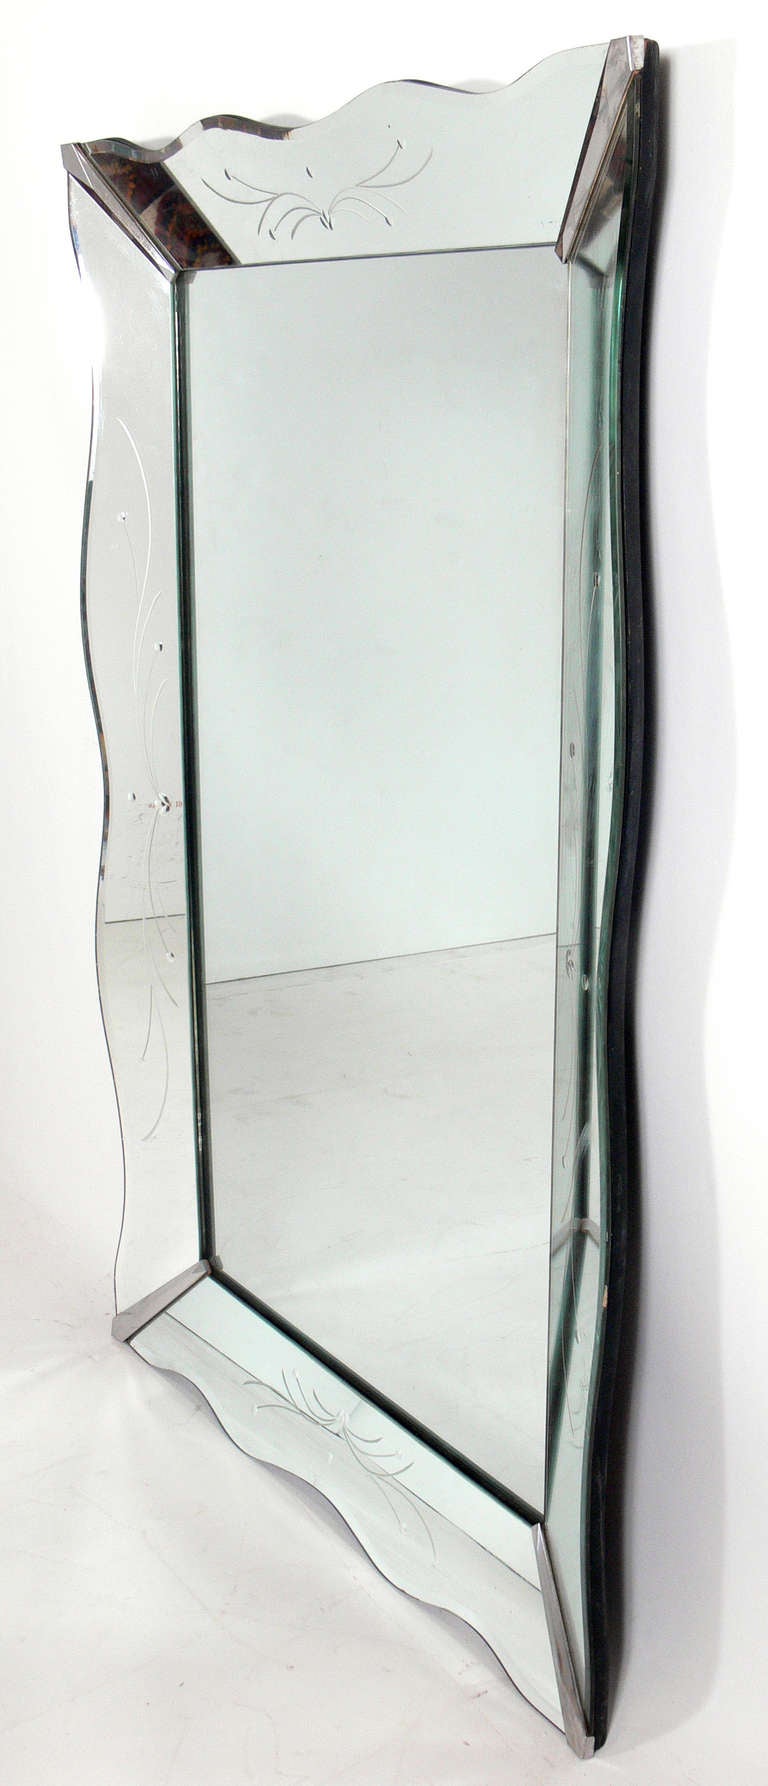 Elegant Scalloped Mirror, circa 1940s. Nicely made with great attention to detail including beveled edges, engraving, and nickel plated corner hardware. This mirror could be used vertically or horizontally. Wired and ready to use.